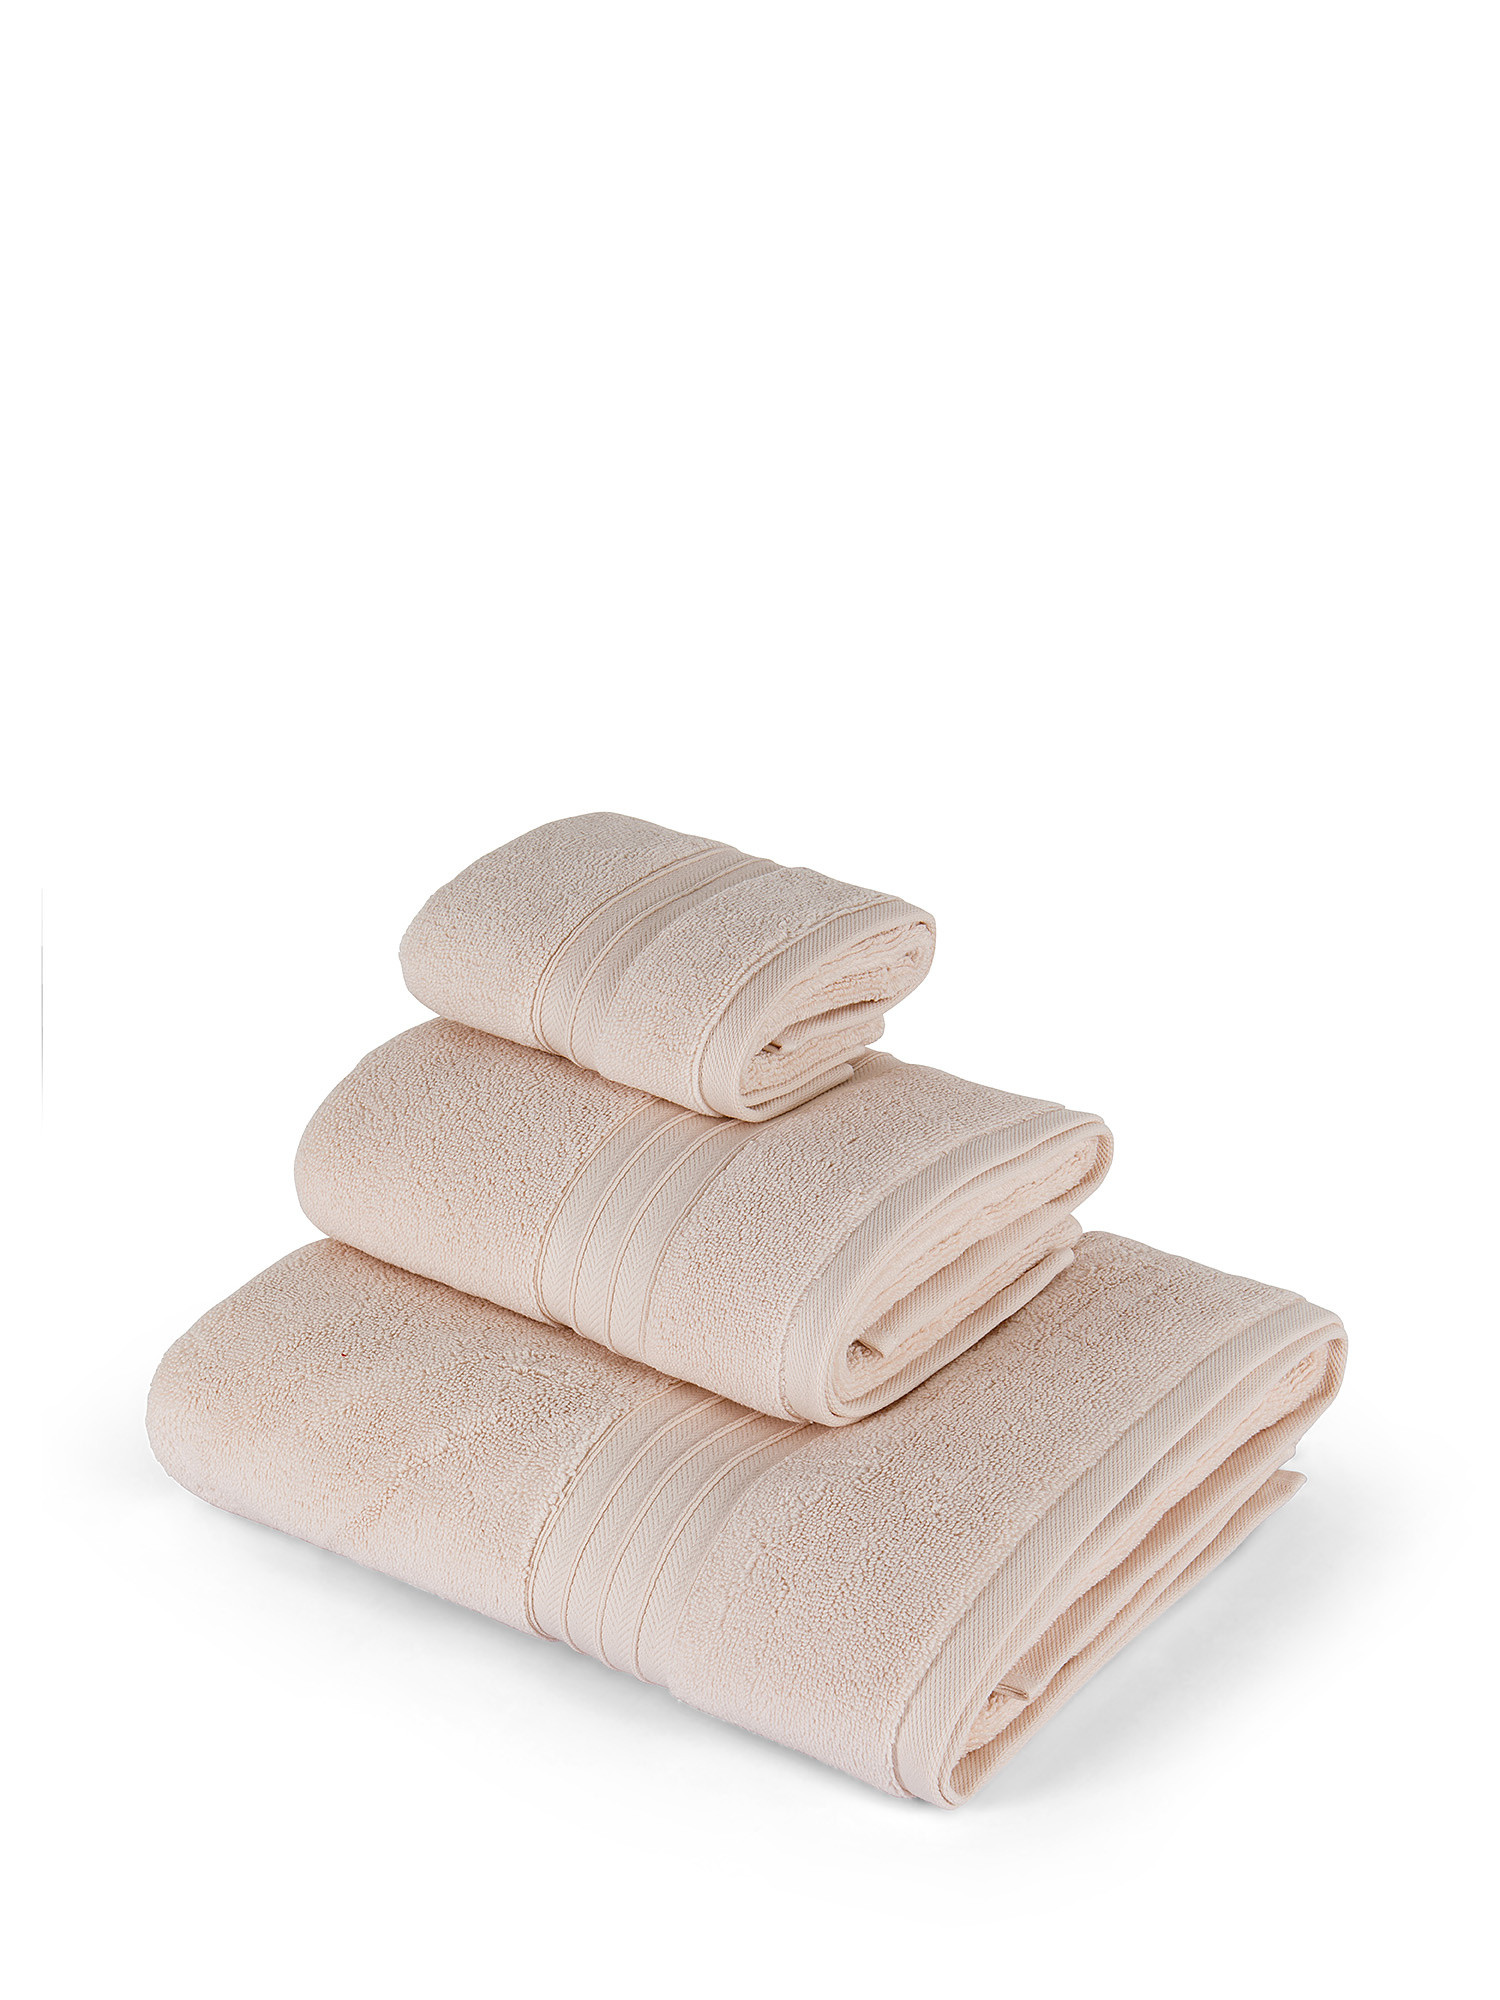 Thermae solid colour 100% cotton towel, Powder Pink, large image number 0